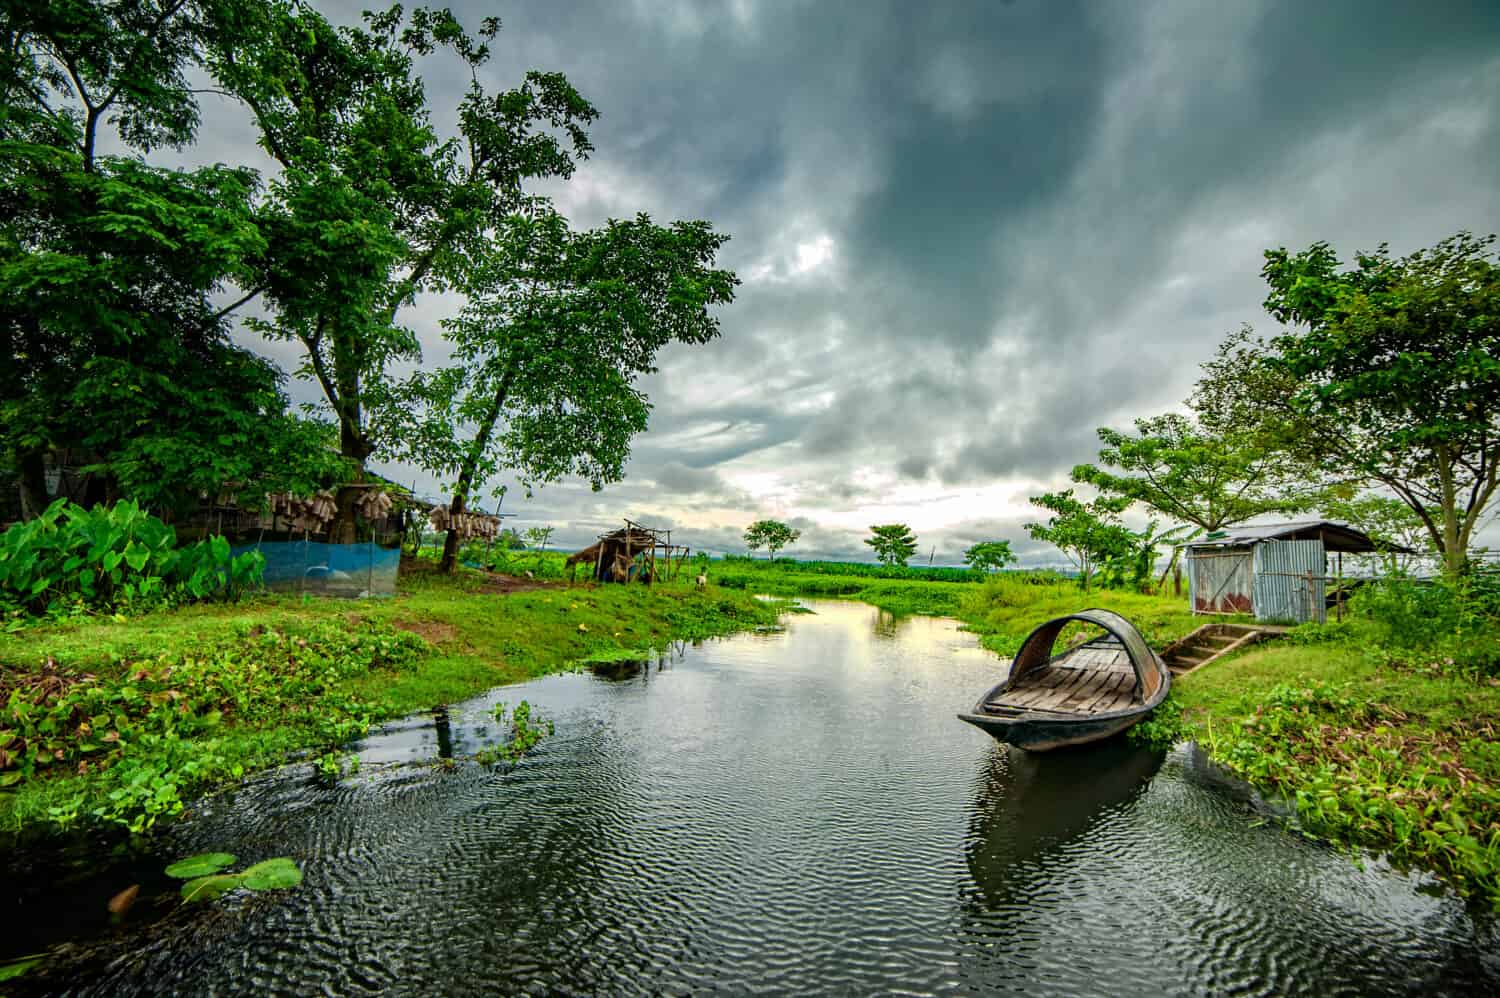 Country boats on a cloudy day in Bangladesh